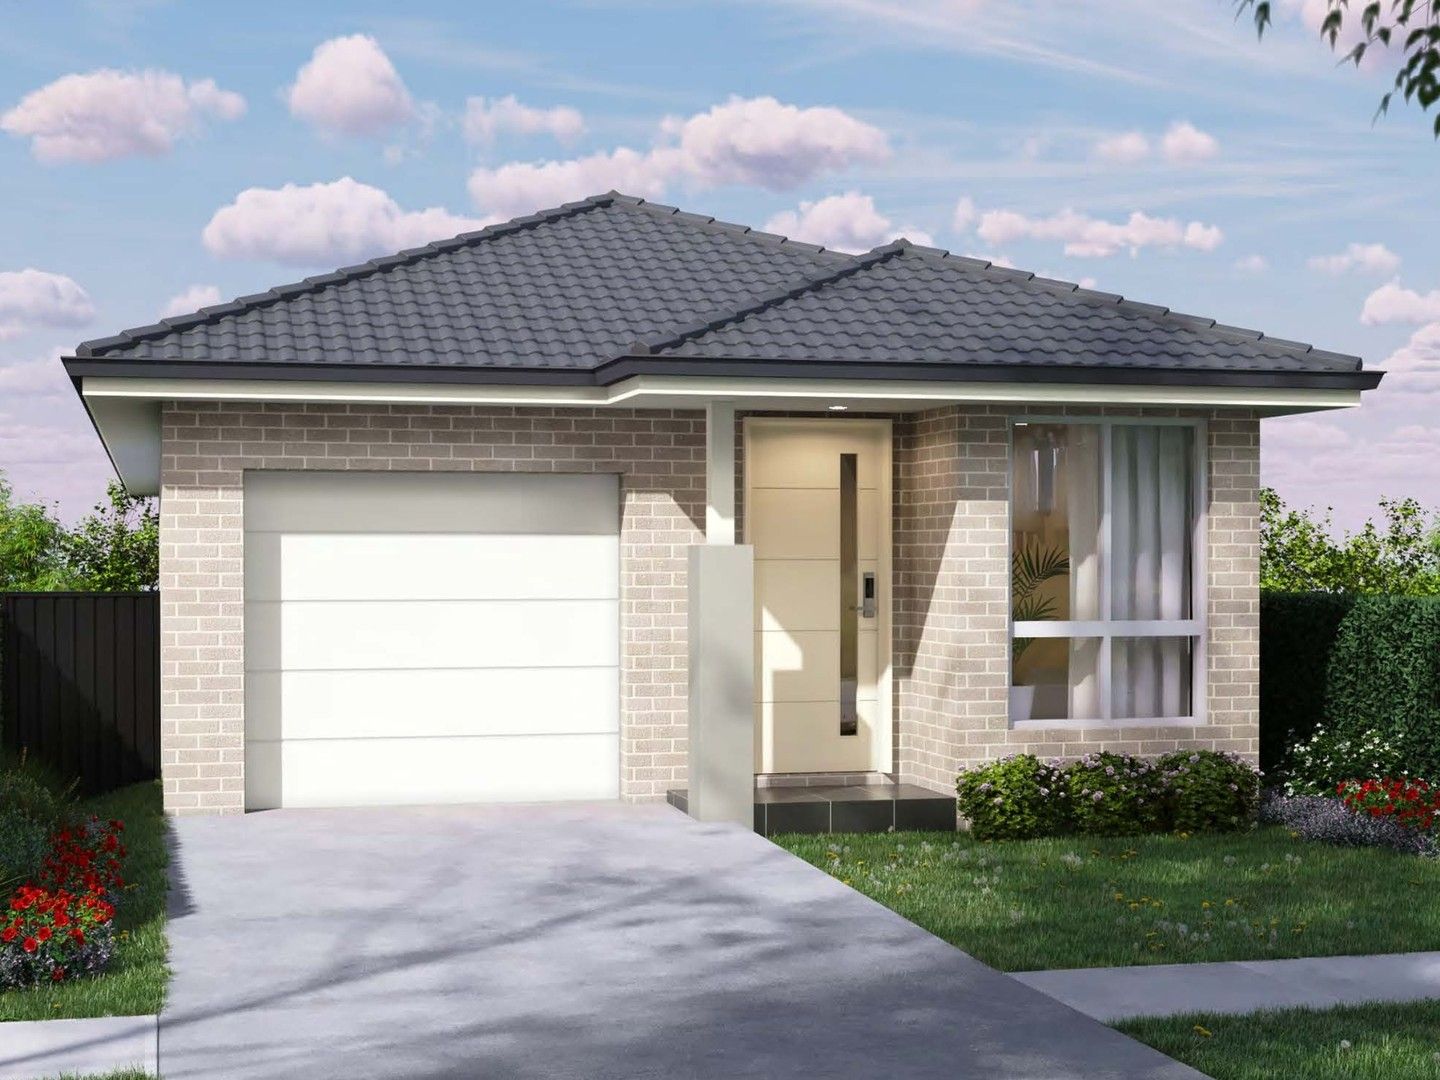 4 bedrooms New House & Land in No Progress Payment Secure With 5% Deposit MARSDEN PARK NSW, 2765